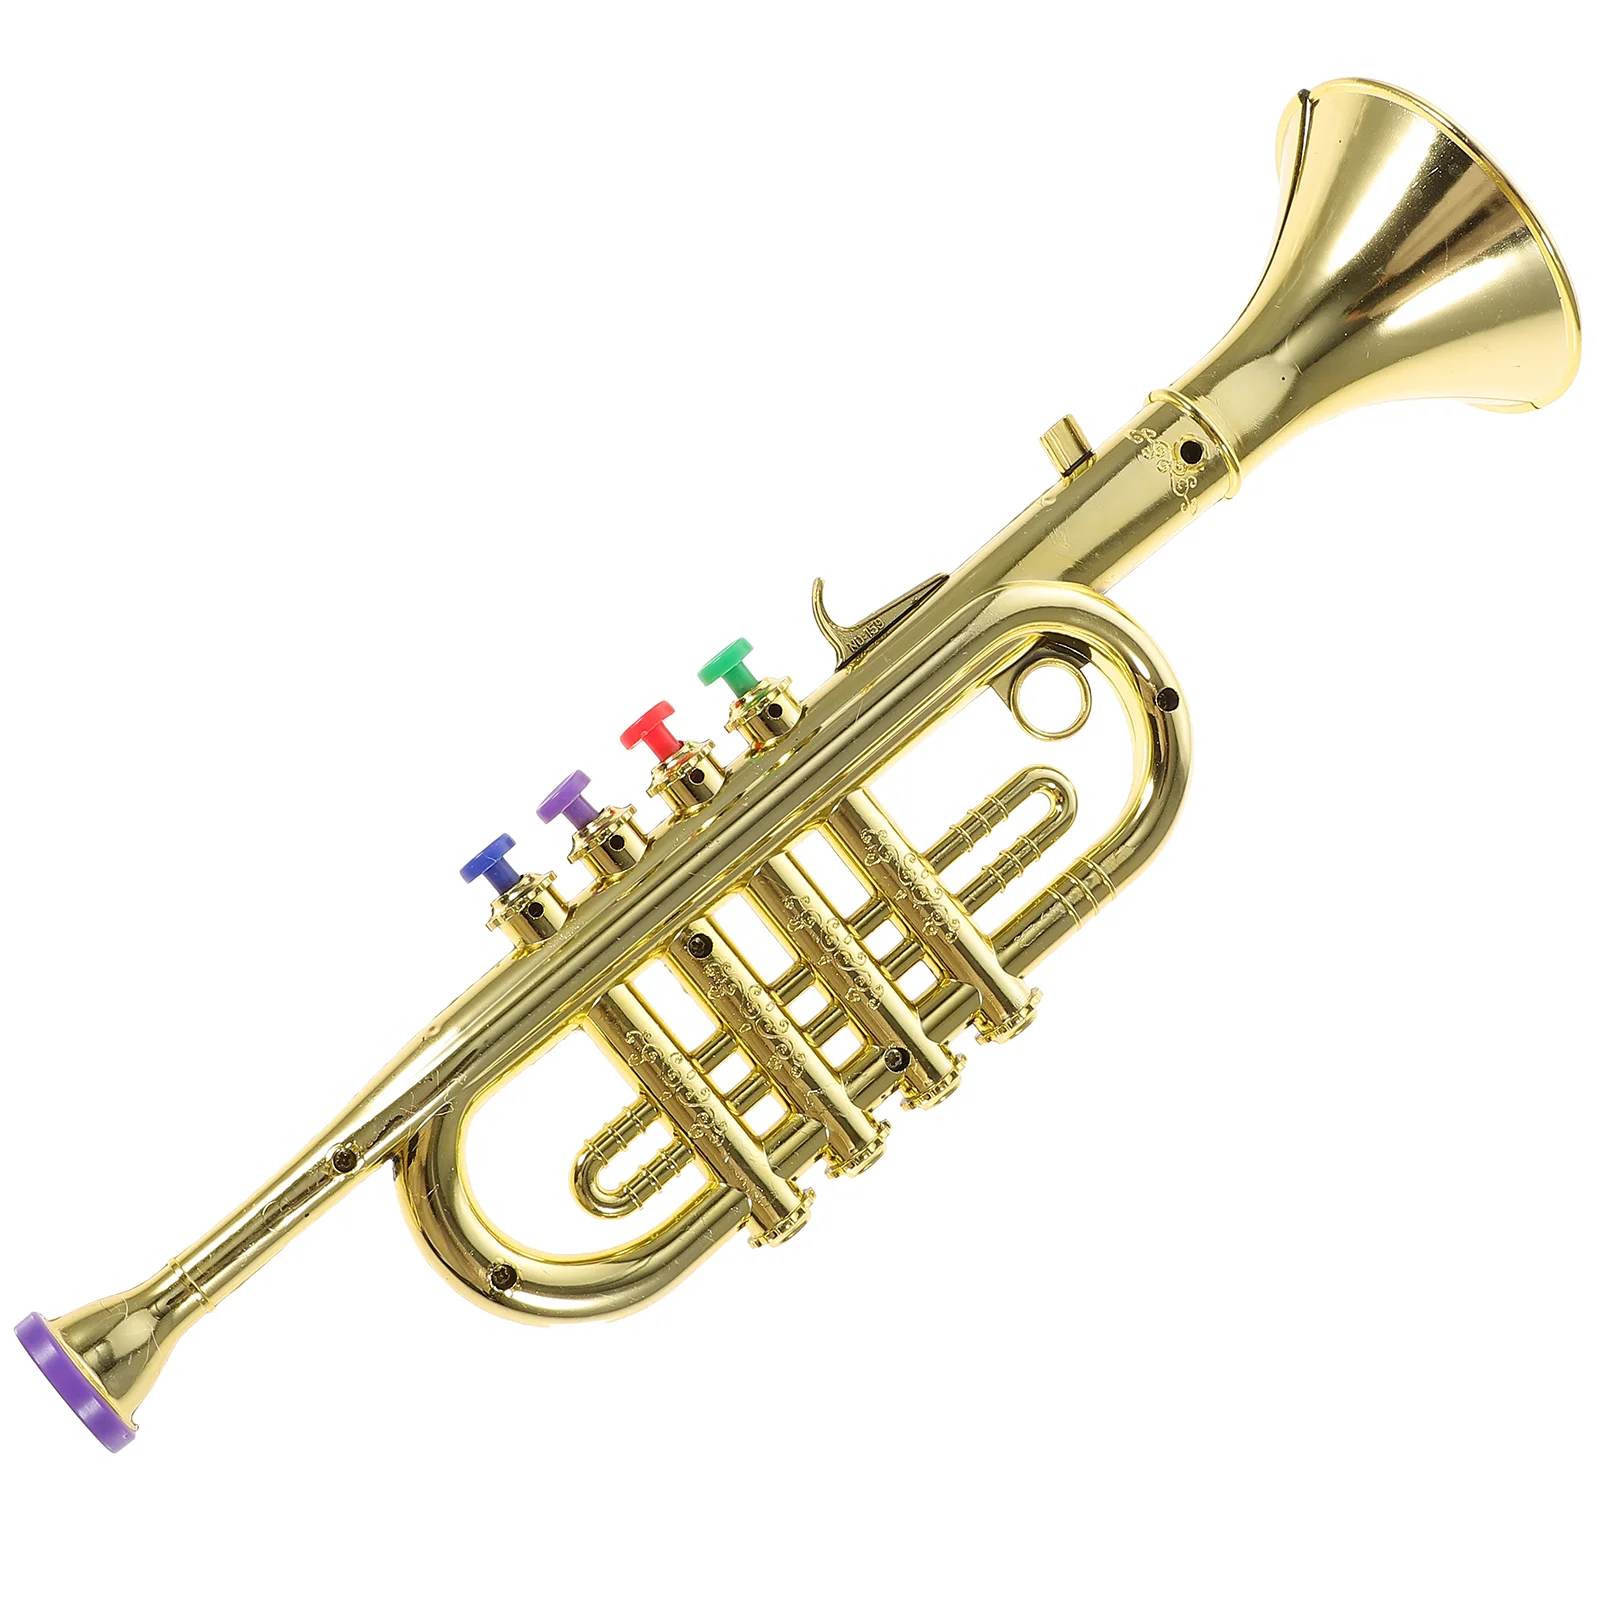 Clarinet Instrument Trumpet Toy Birthday Party Favor Children Musical Instrument Toy Birthday Gift Colored Key Trumpet enlarge